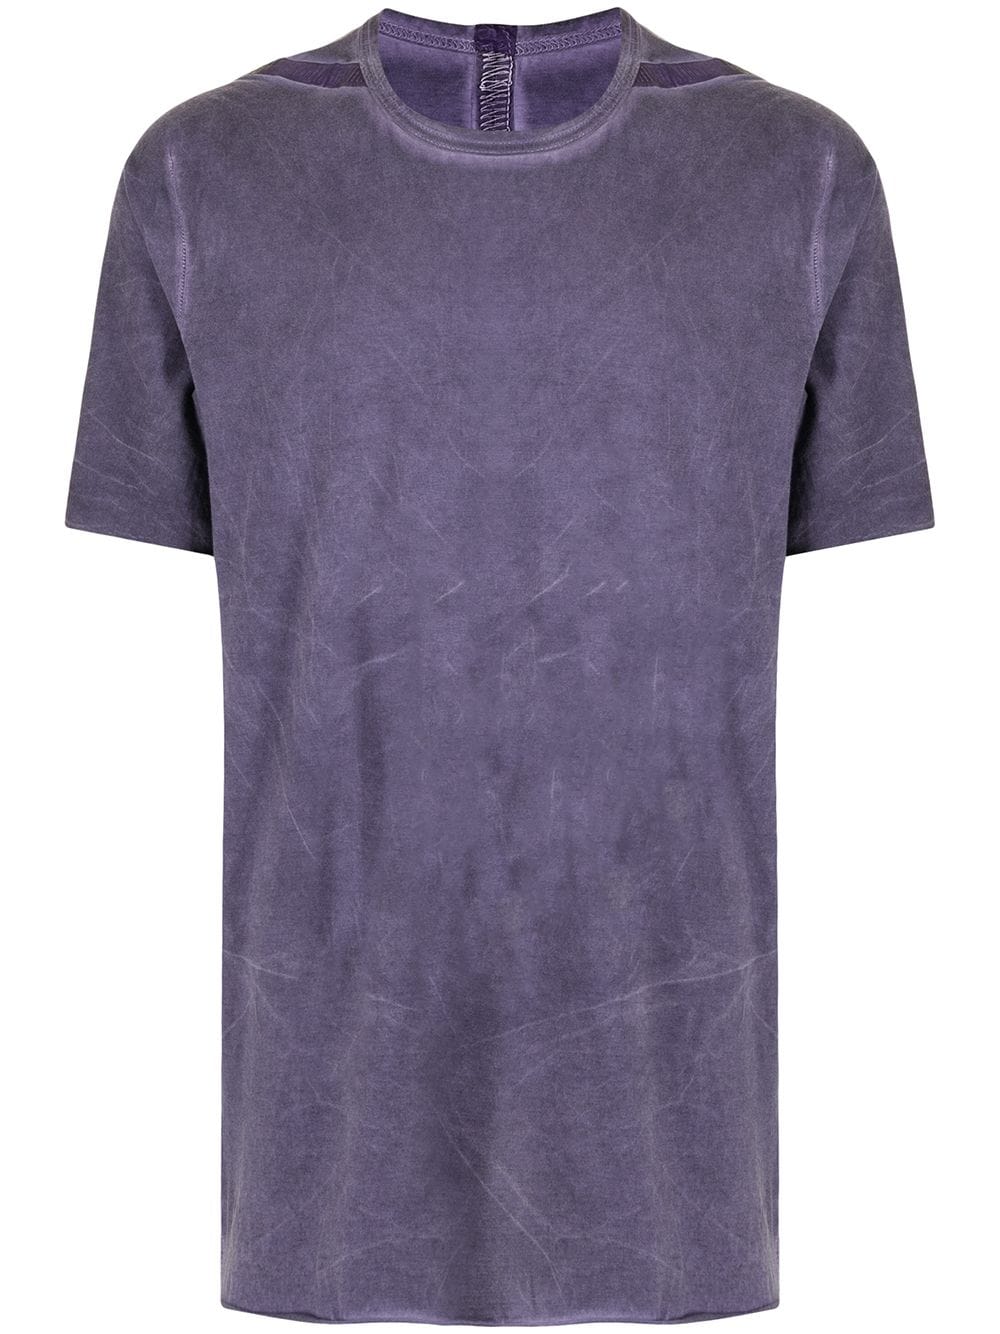 ISAAC SELLAM EXPERIENCE WASHED-EFFECT T-SHIRT